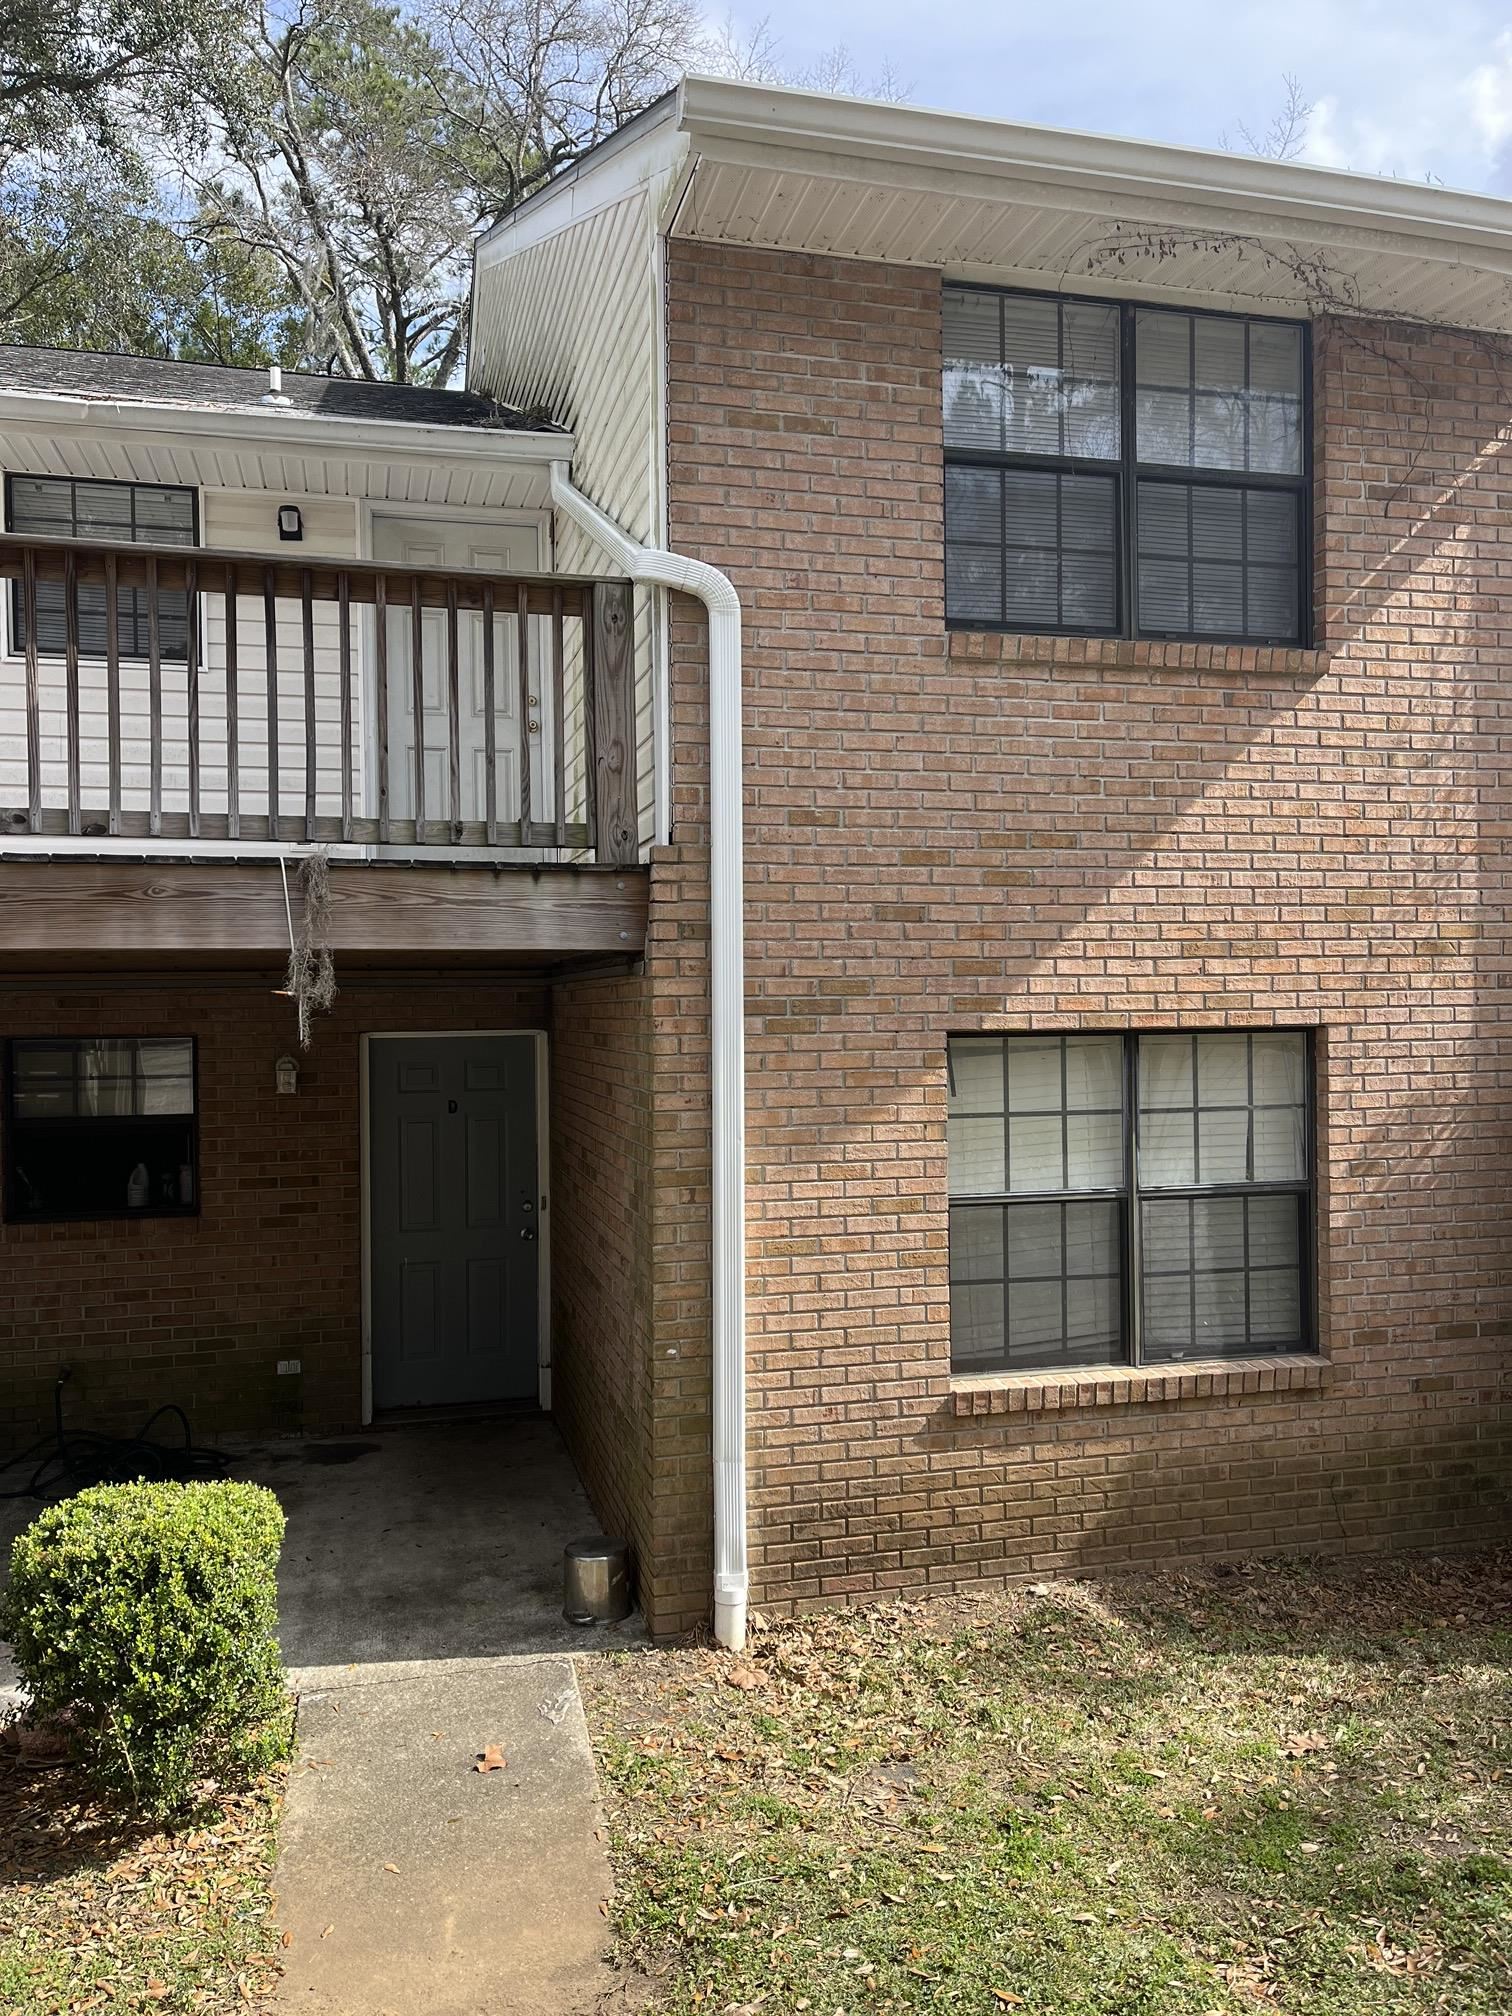 1101 Green Tree Court,TALLAHASSEE,Florida 32304,2 Bedrooms Bedrooms,2 BathroomsBathrooms,Condo,1101 Green Tree Court,370019